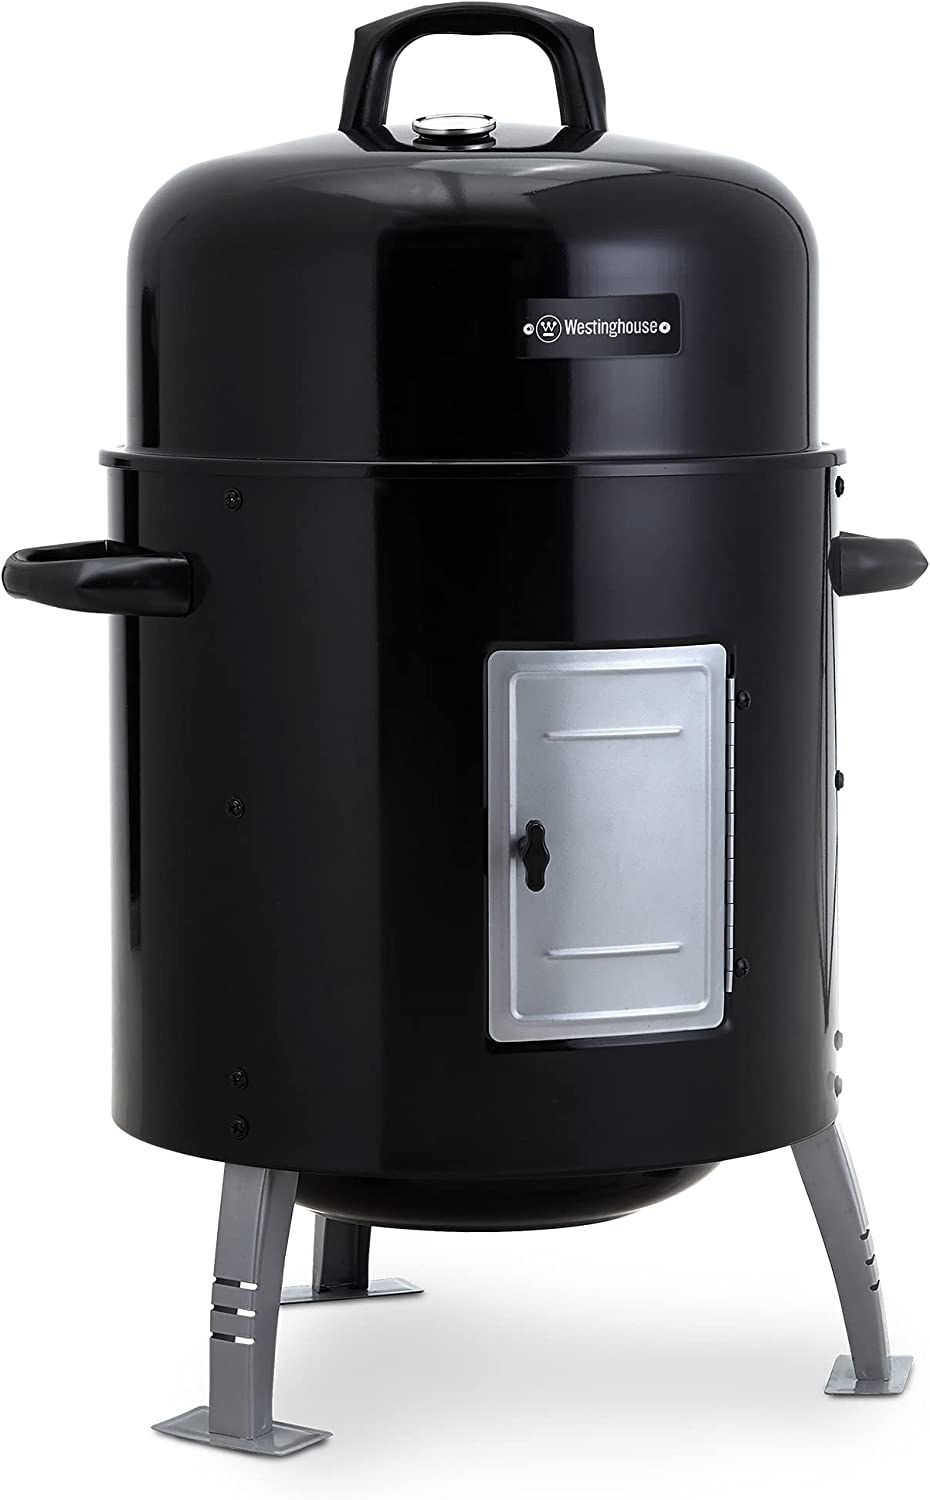 https://bigbigmart.com/wp-content/uploads/2023/06/Westinghouse-Bullet-Smoker-Portable-16-Inch-Char-Broil-Steel-Smoker-Features-a-Black-Powder-Coated-Lid-with-Porcelain-Cooking-Grid-Perfect-for-Outdoors.jpg